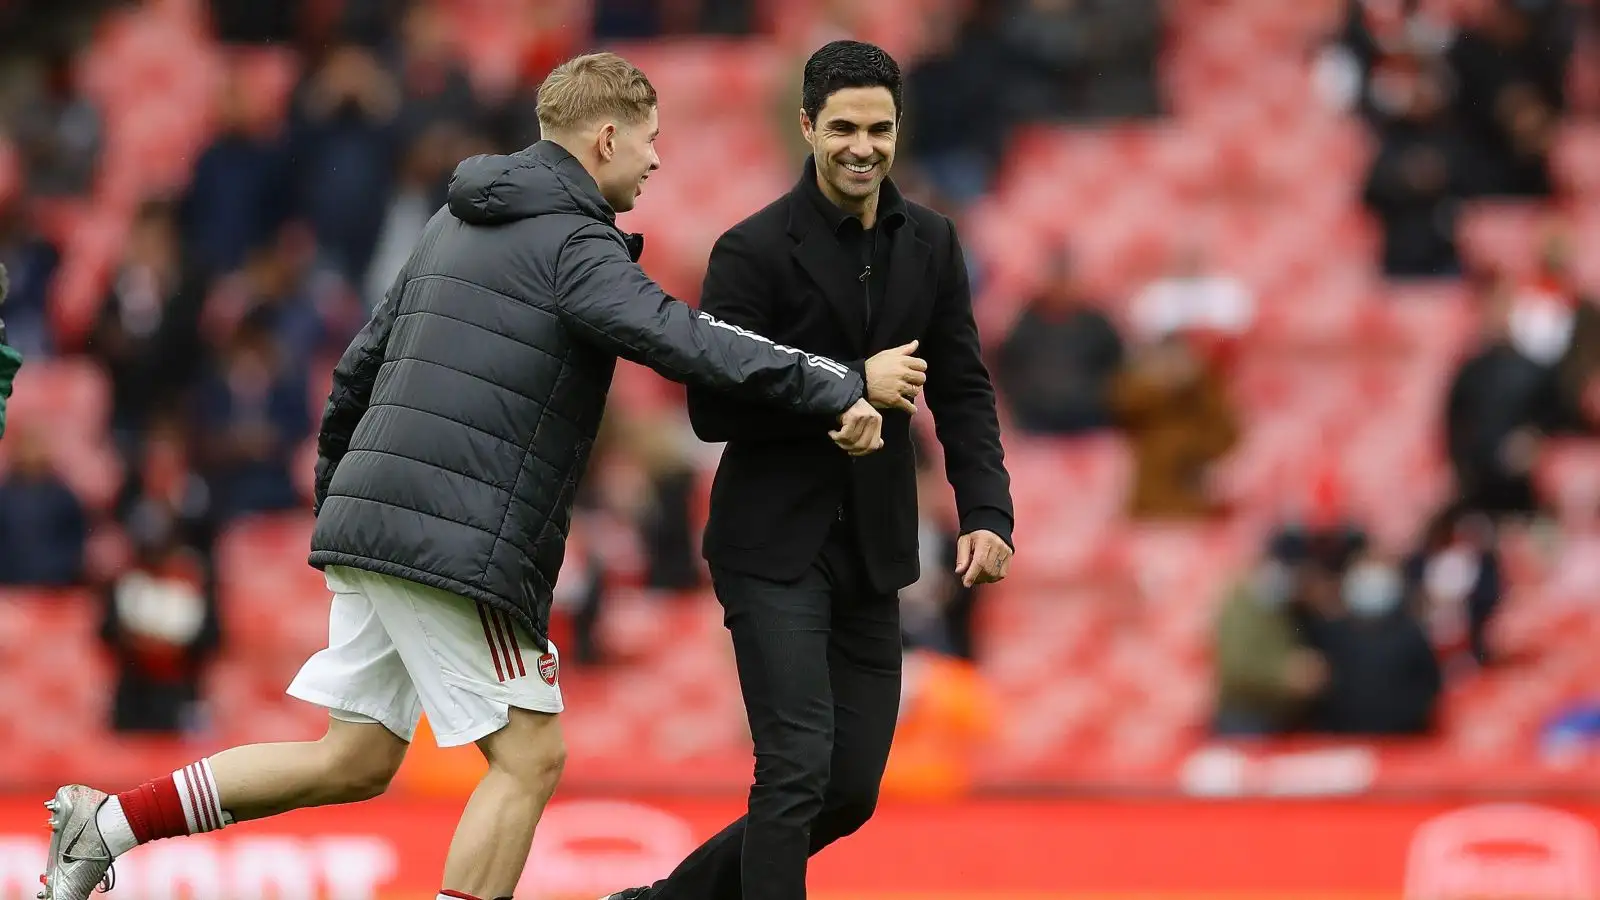 Arsenal midfielder Emile Smith Rowe and Mikel Arteta share a laugh